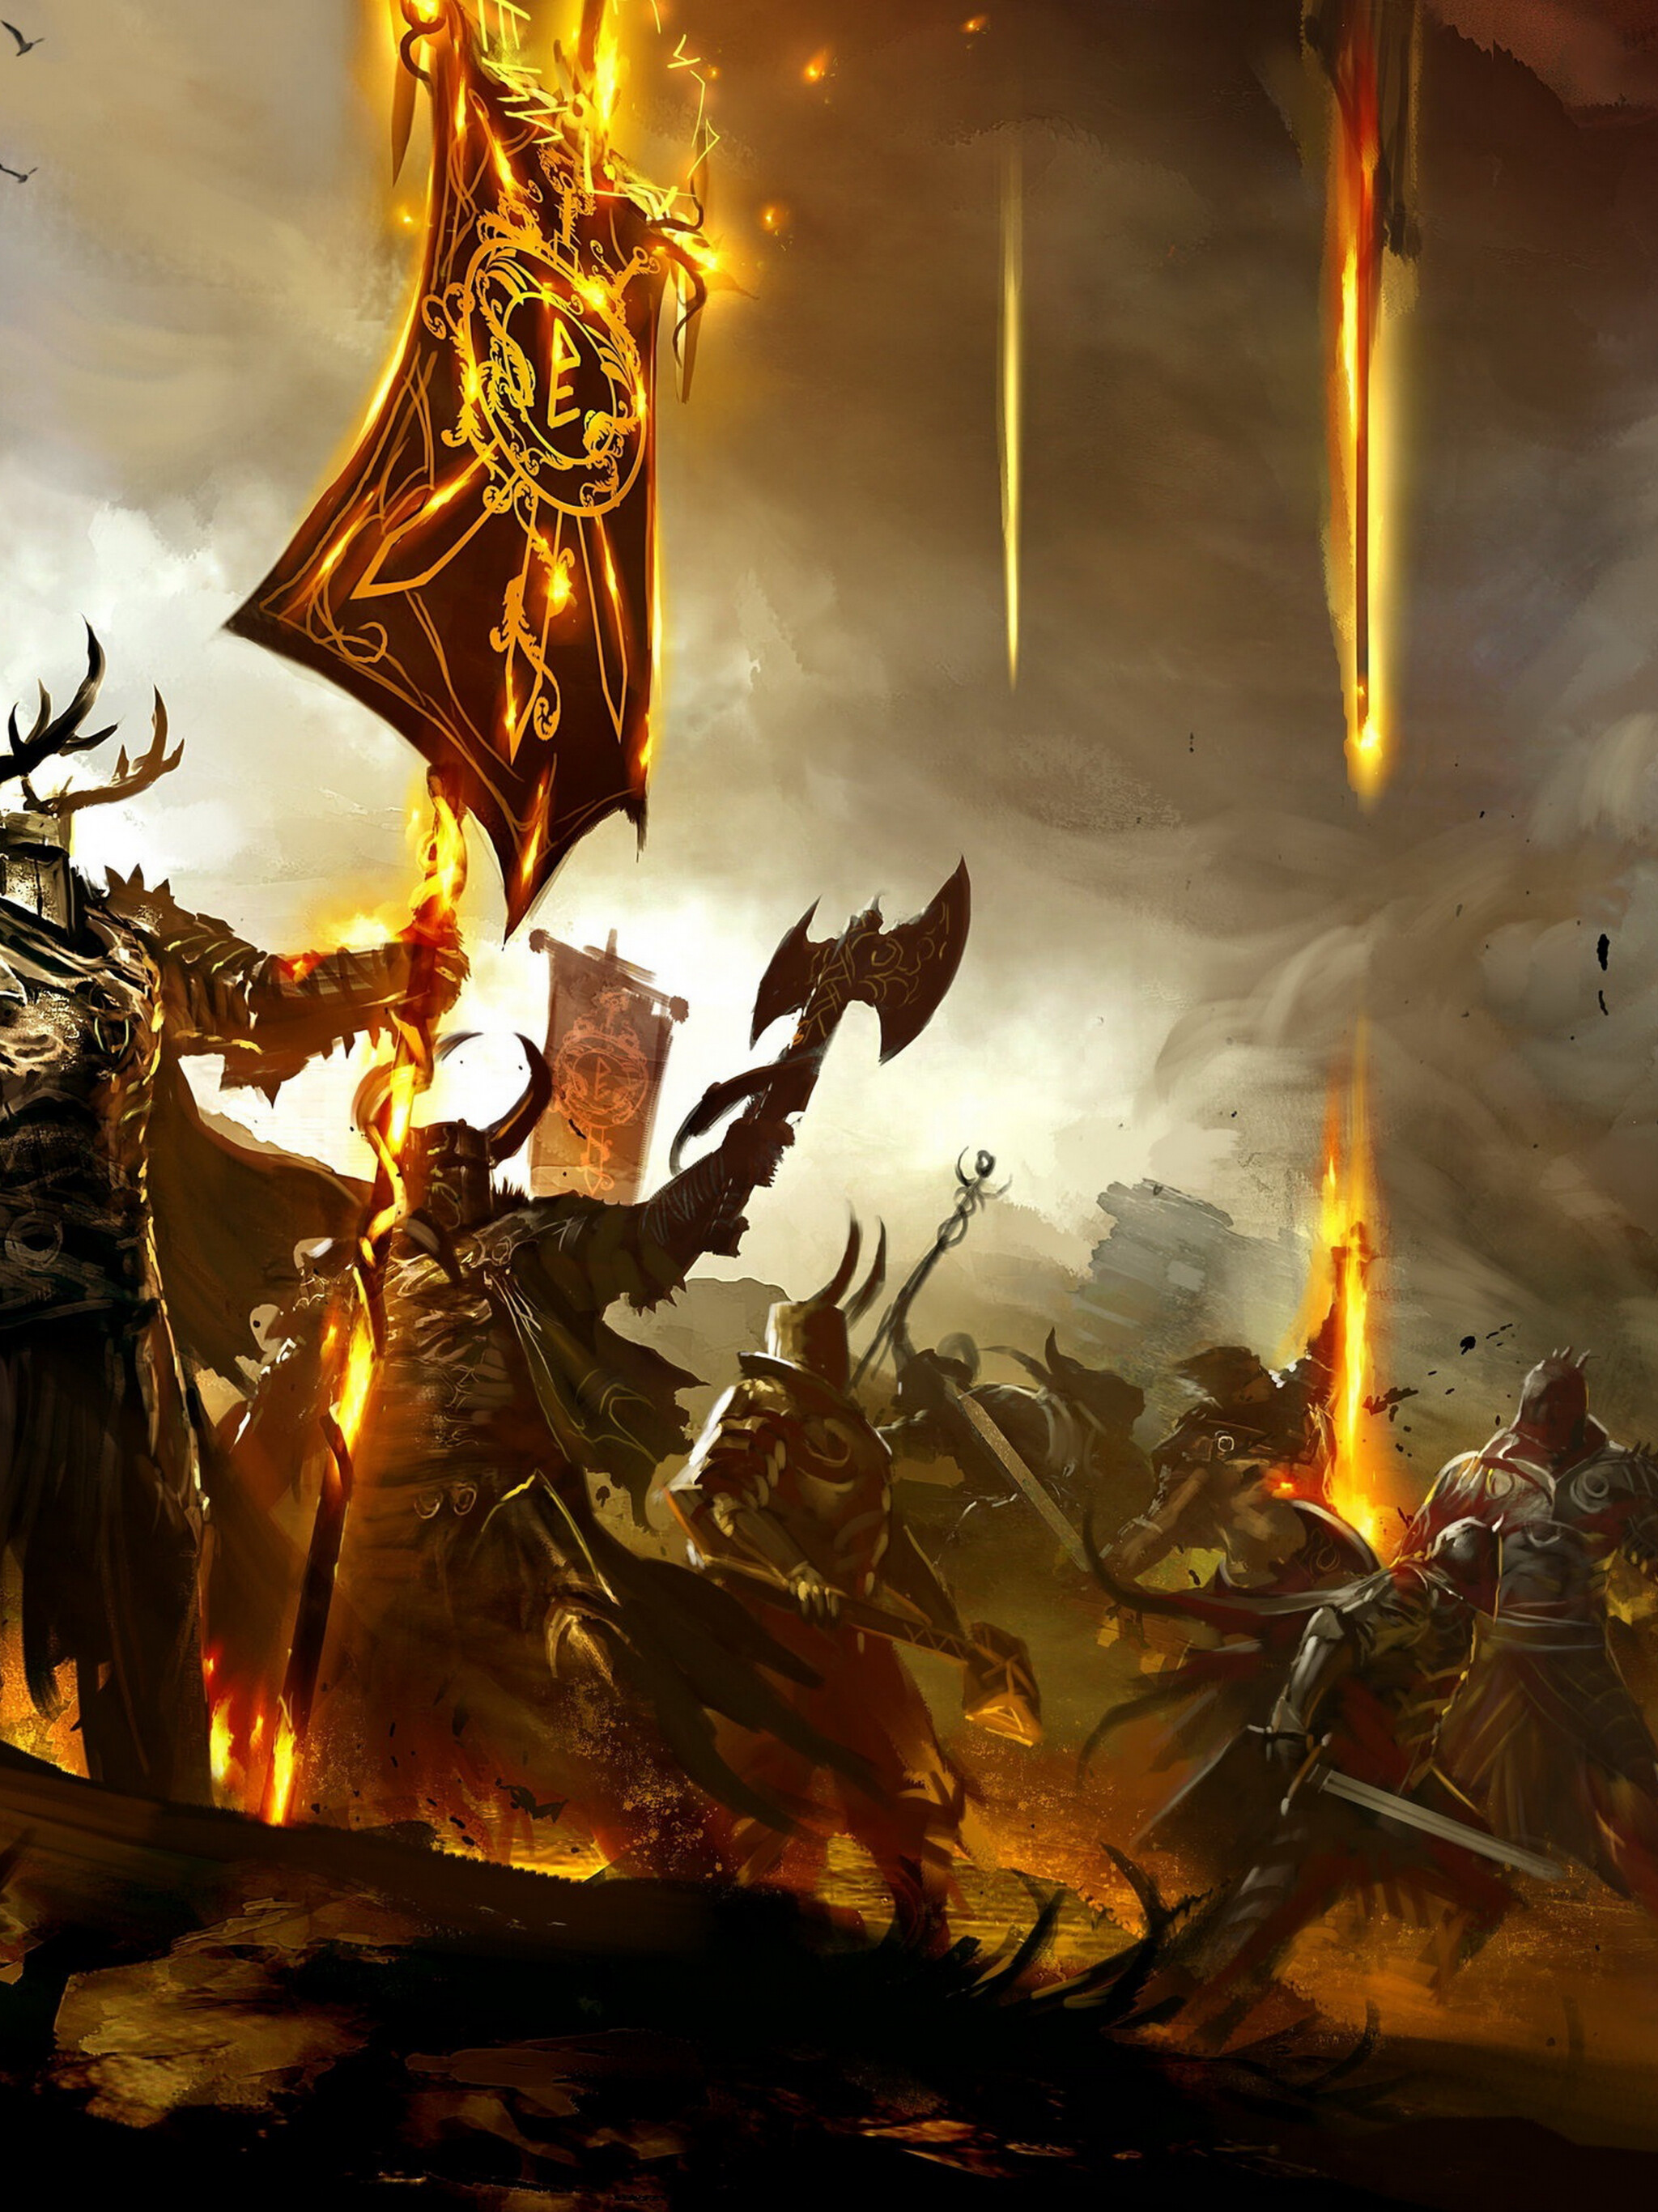 Guild Wars: A multiplayer online action role-playing game developed by ArenaNet, Armor, Battle. 2050x2740 HD Wallpaper.